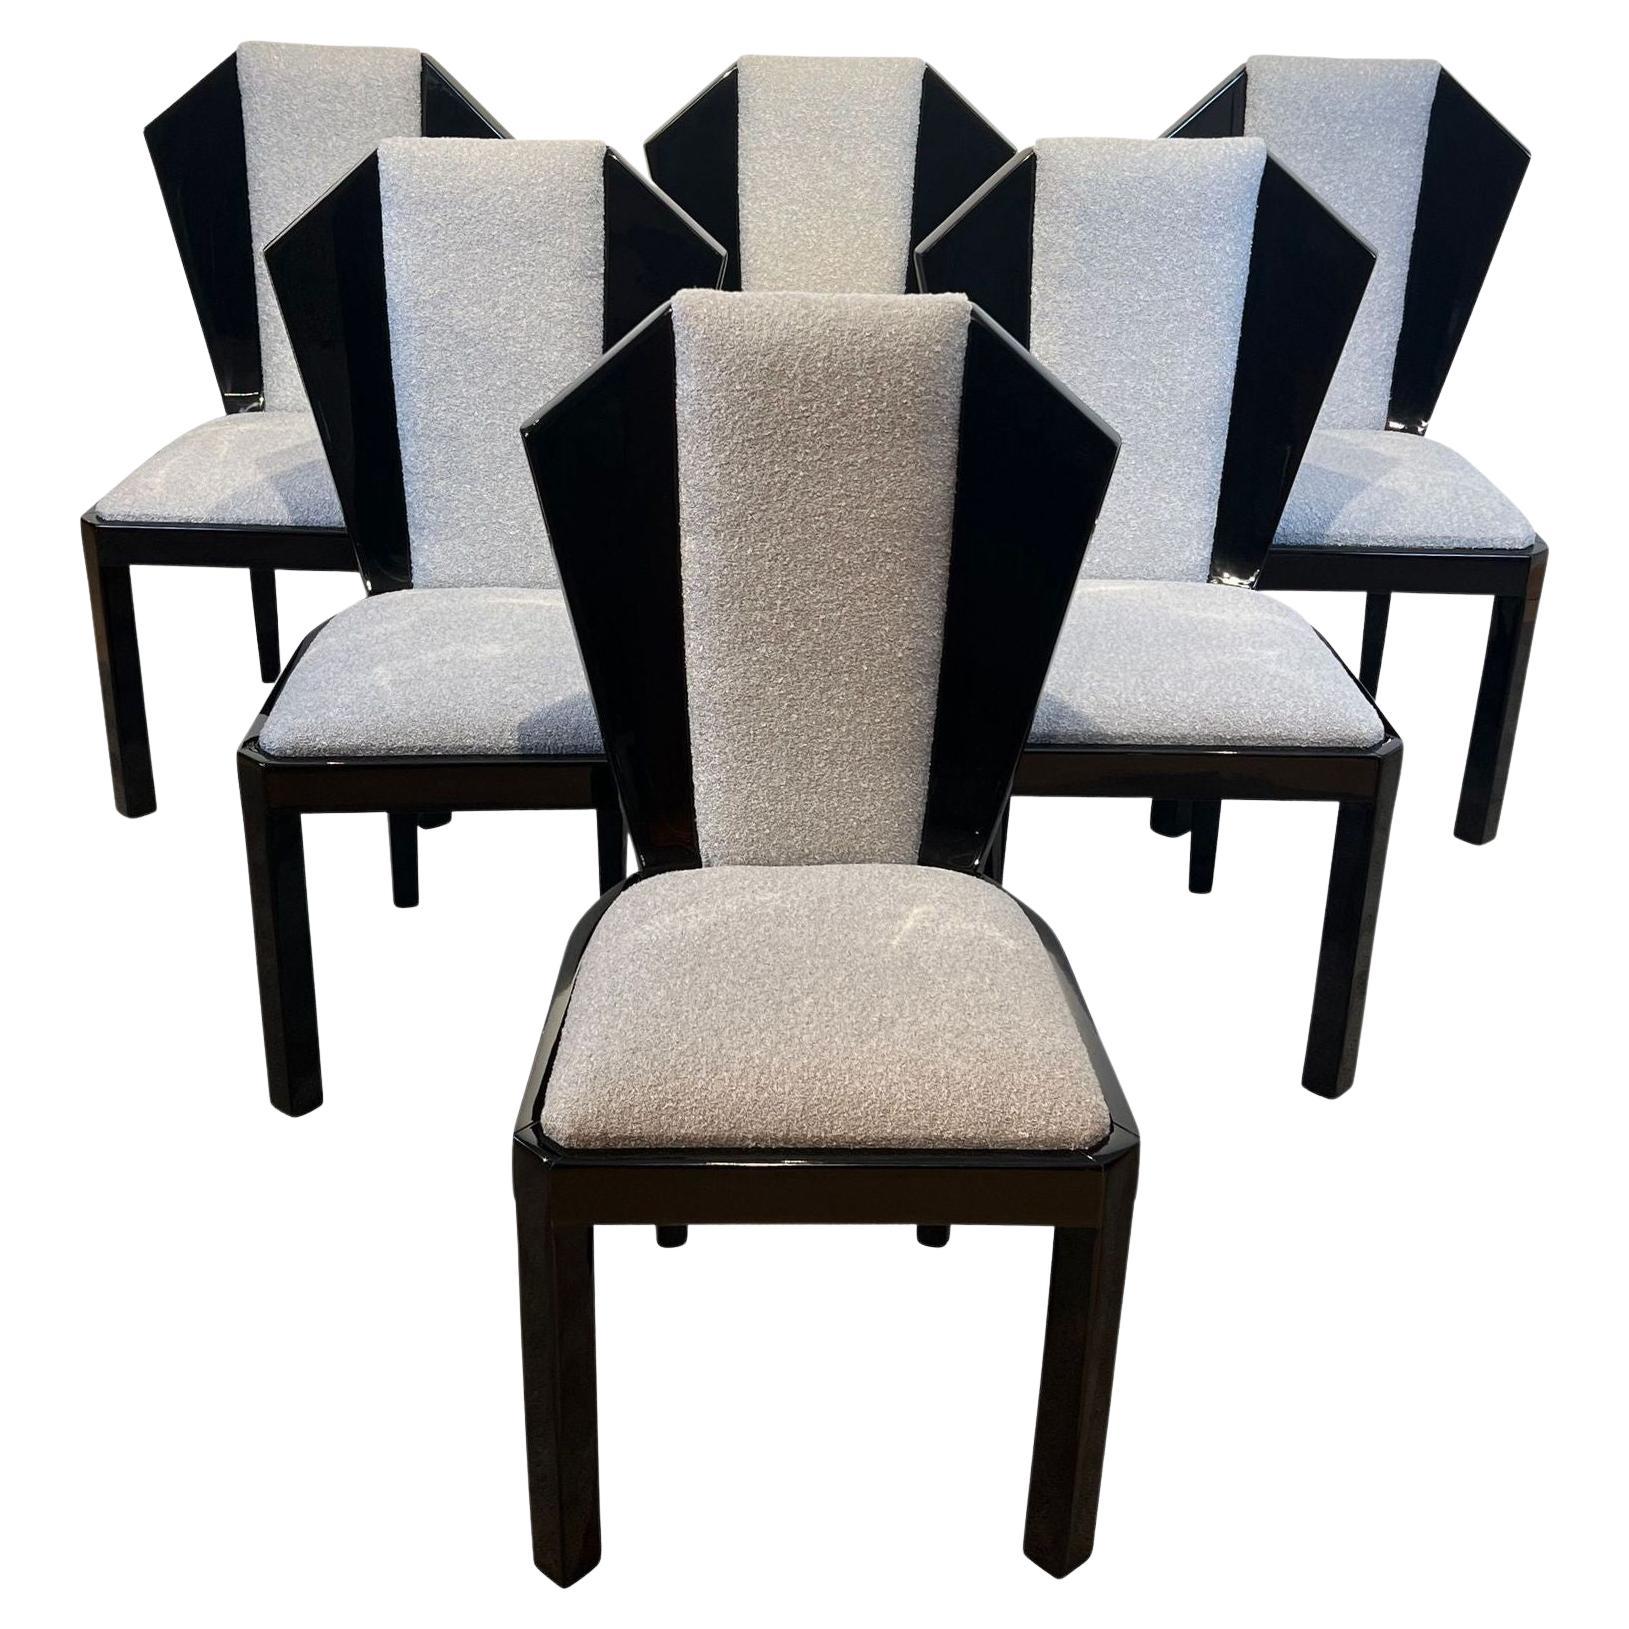 Set of Six Art Deco Dining Chairs, Black Lacquer, Grey Fabric, France circa 1930